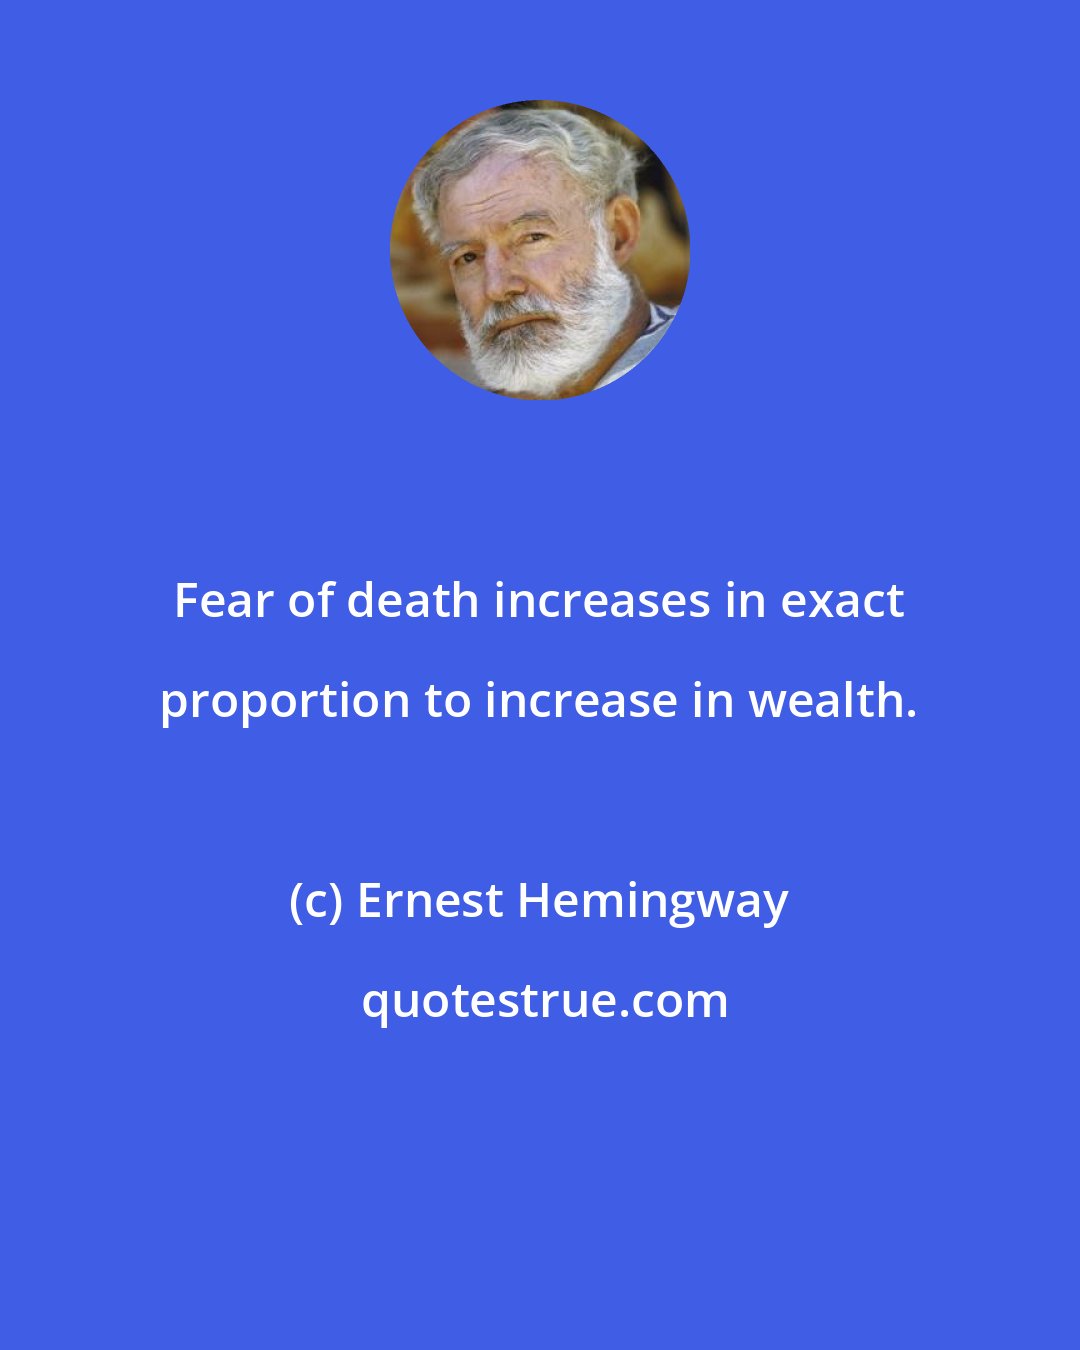 Ernest Hemingway: Fear of death increases in exact proportion to increase in wealth.